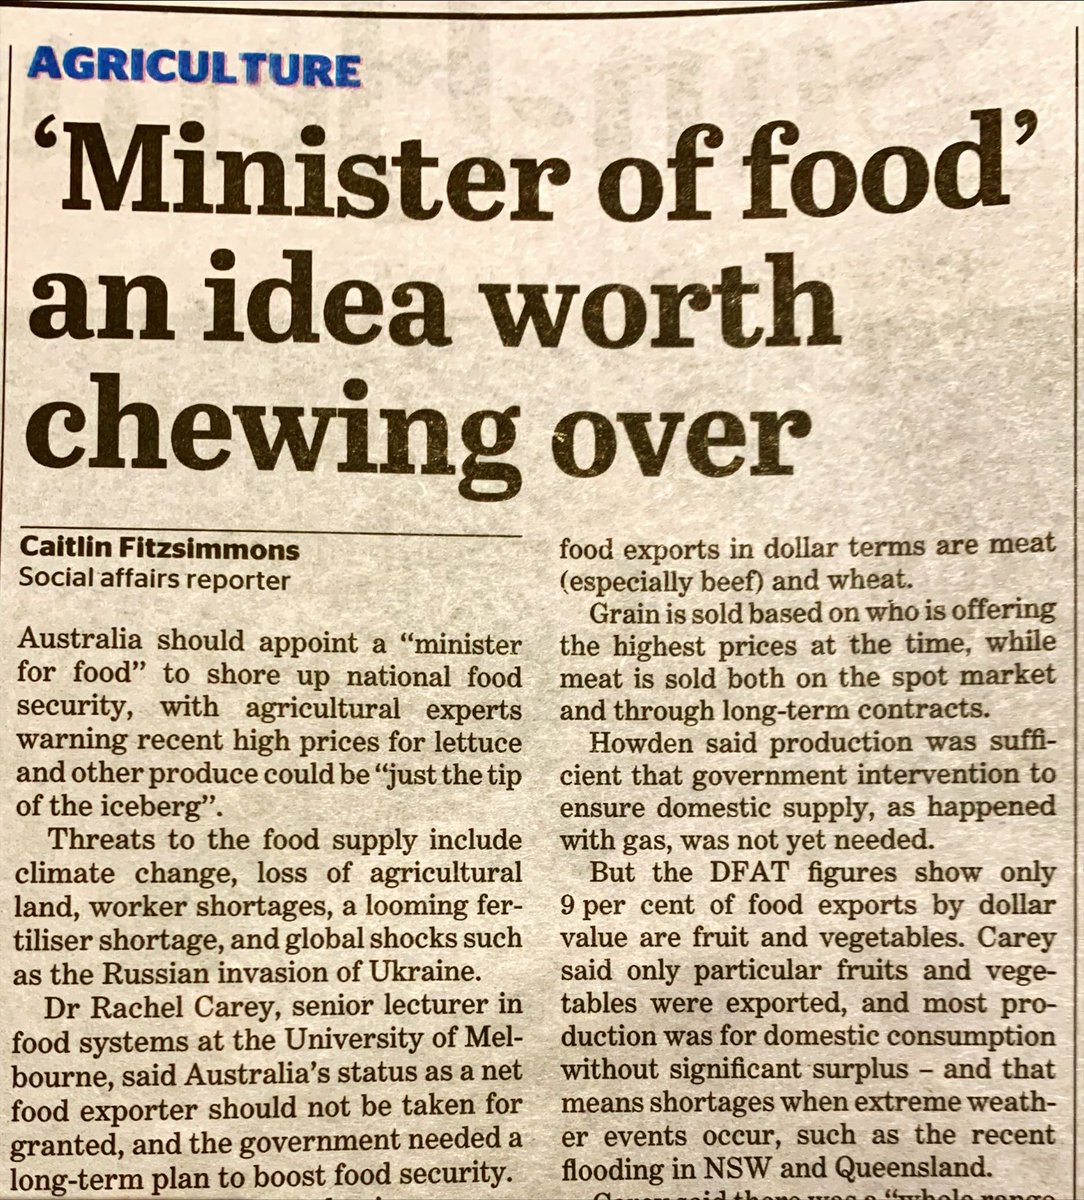 The @smh still has the capacity to (pleasantly) surprise. Great comments by @DrRachelCarey on our export-driven food supply, and why Australia can’t take food security for granted.